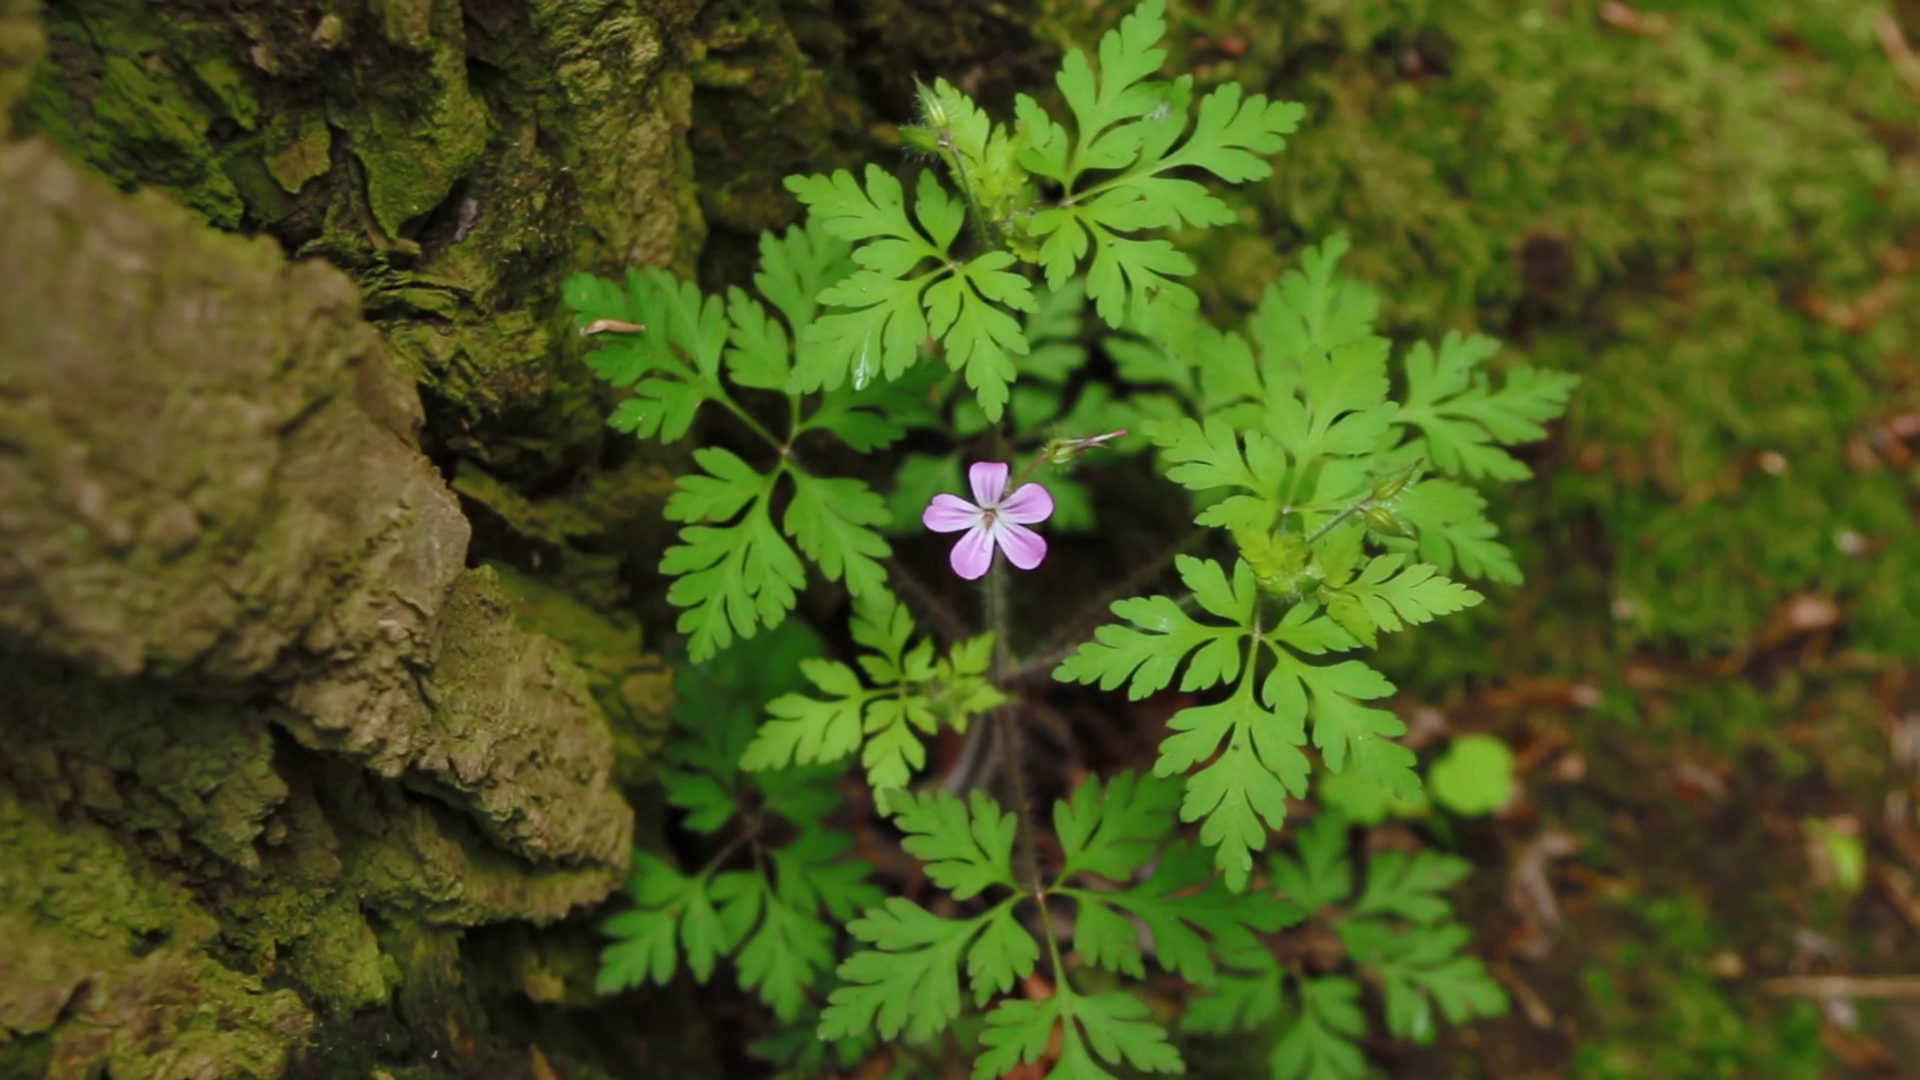 One small purple flower in the wild forest. Herb Robert flower ...